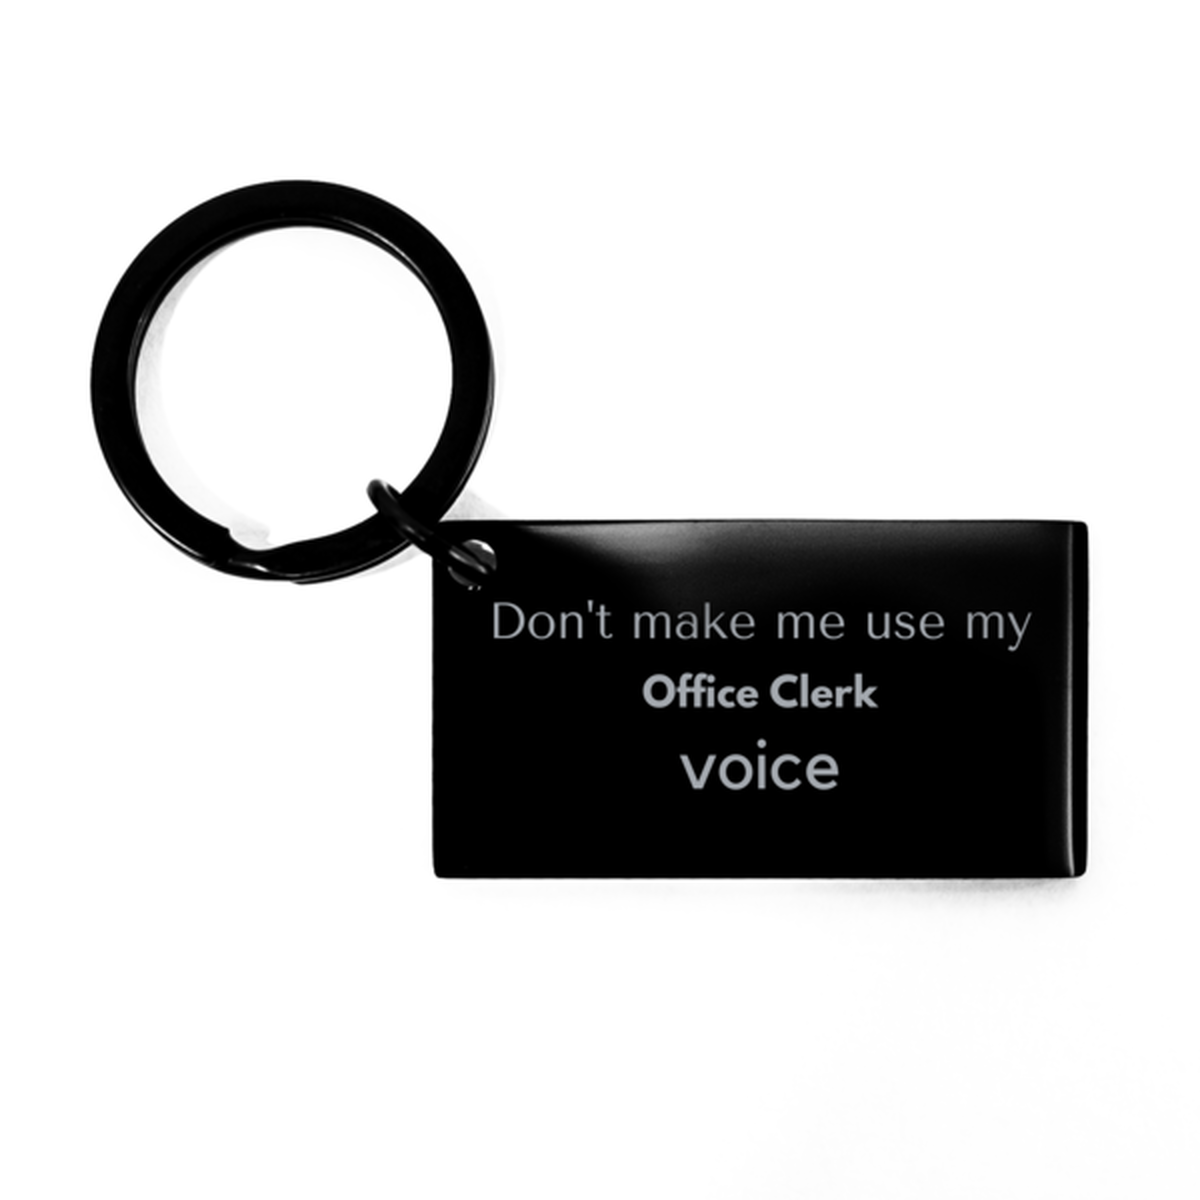 Don't make me use my Office Clerk voice, Sarcasm Office Clerk Gifts, Christmas Office Clerk Keychain Birthday Unique Gifts For Office Clerk Coworkers, Men, Women, Colleague, Friends